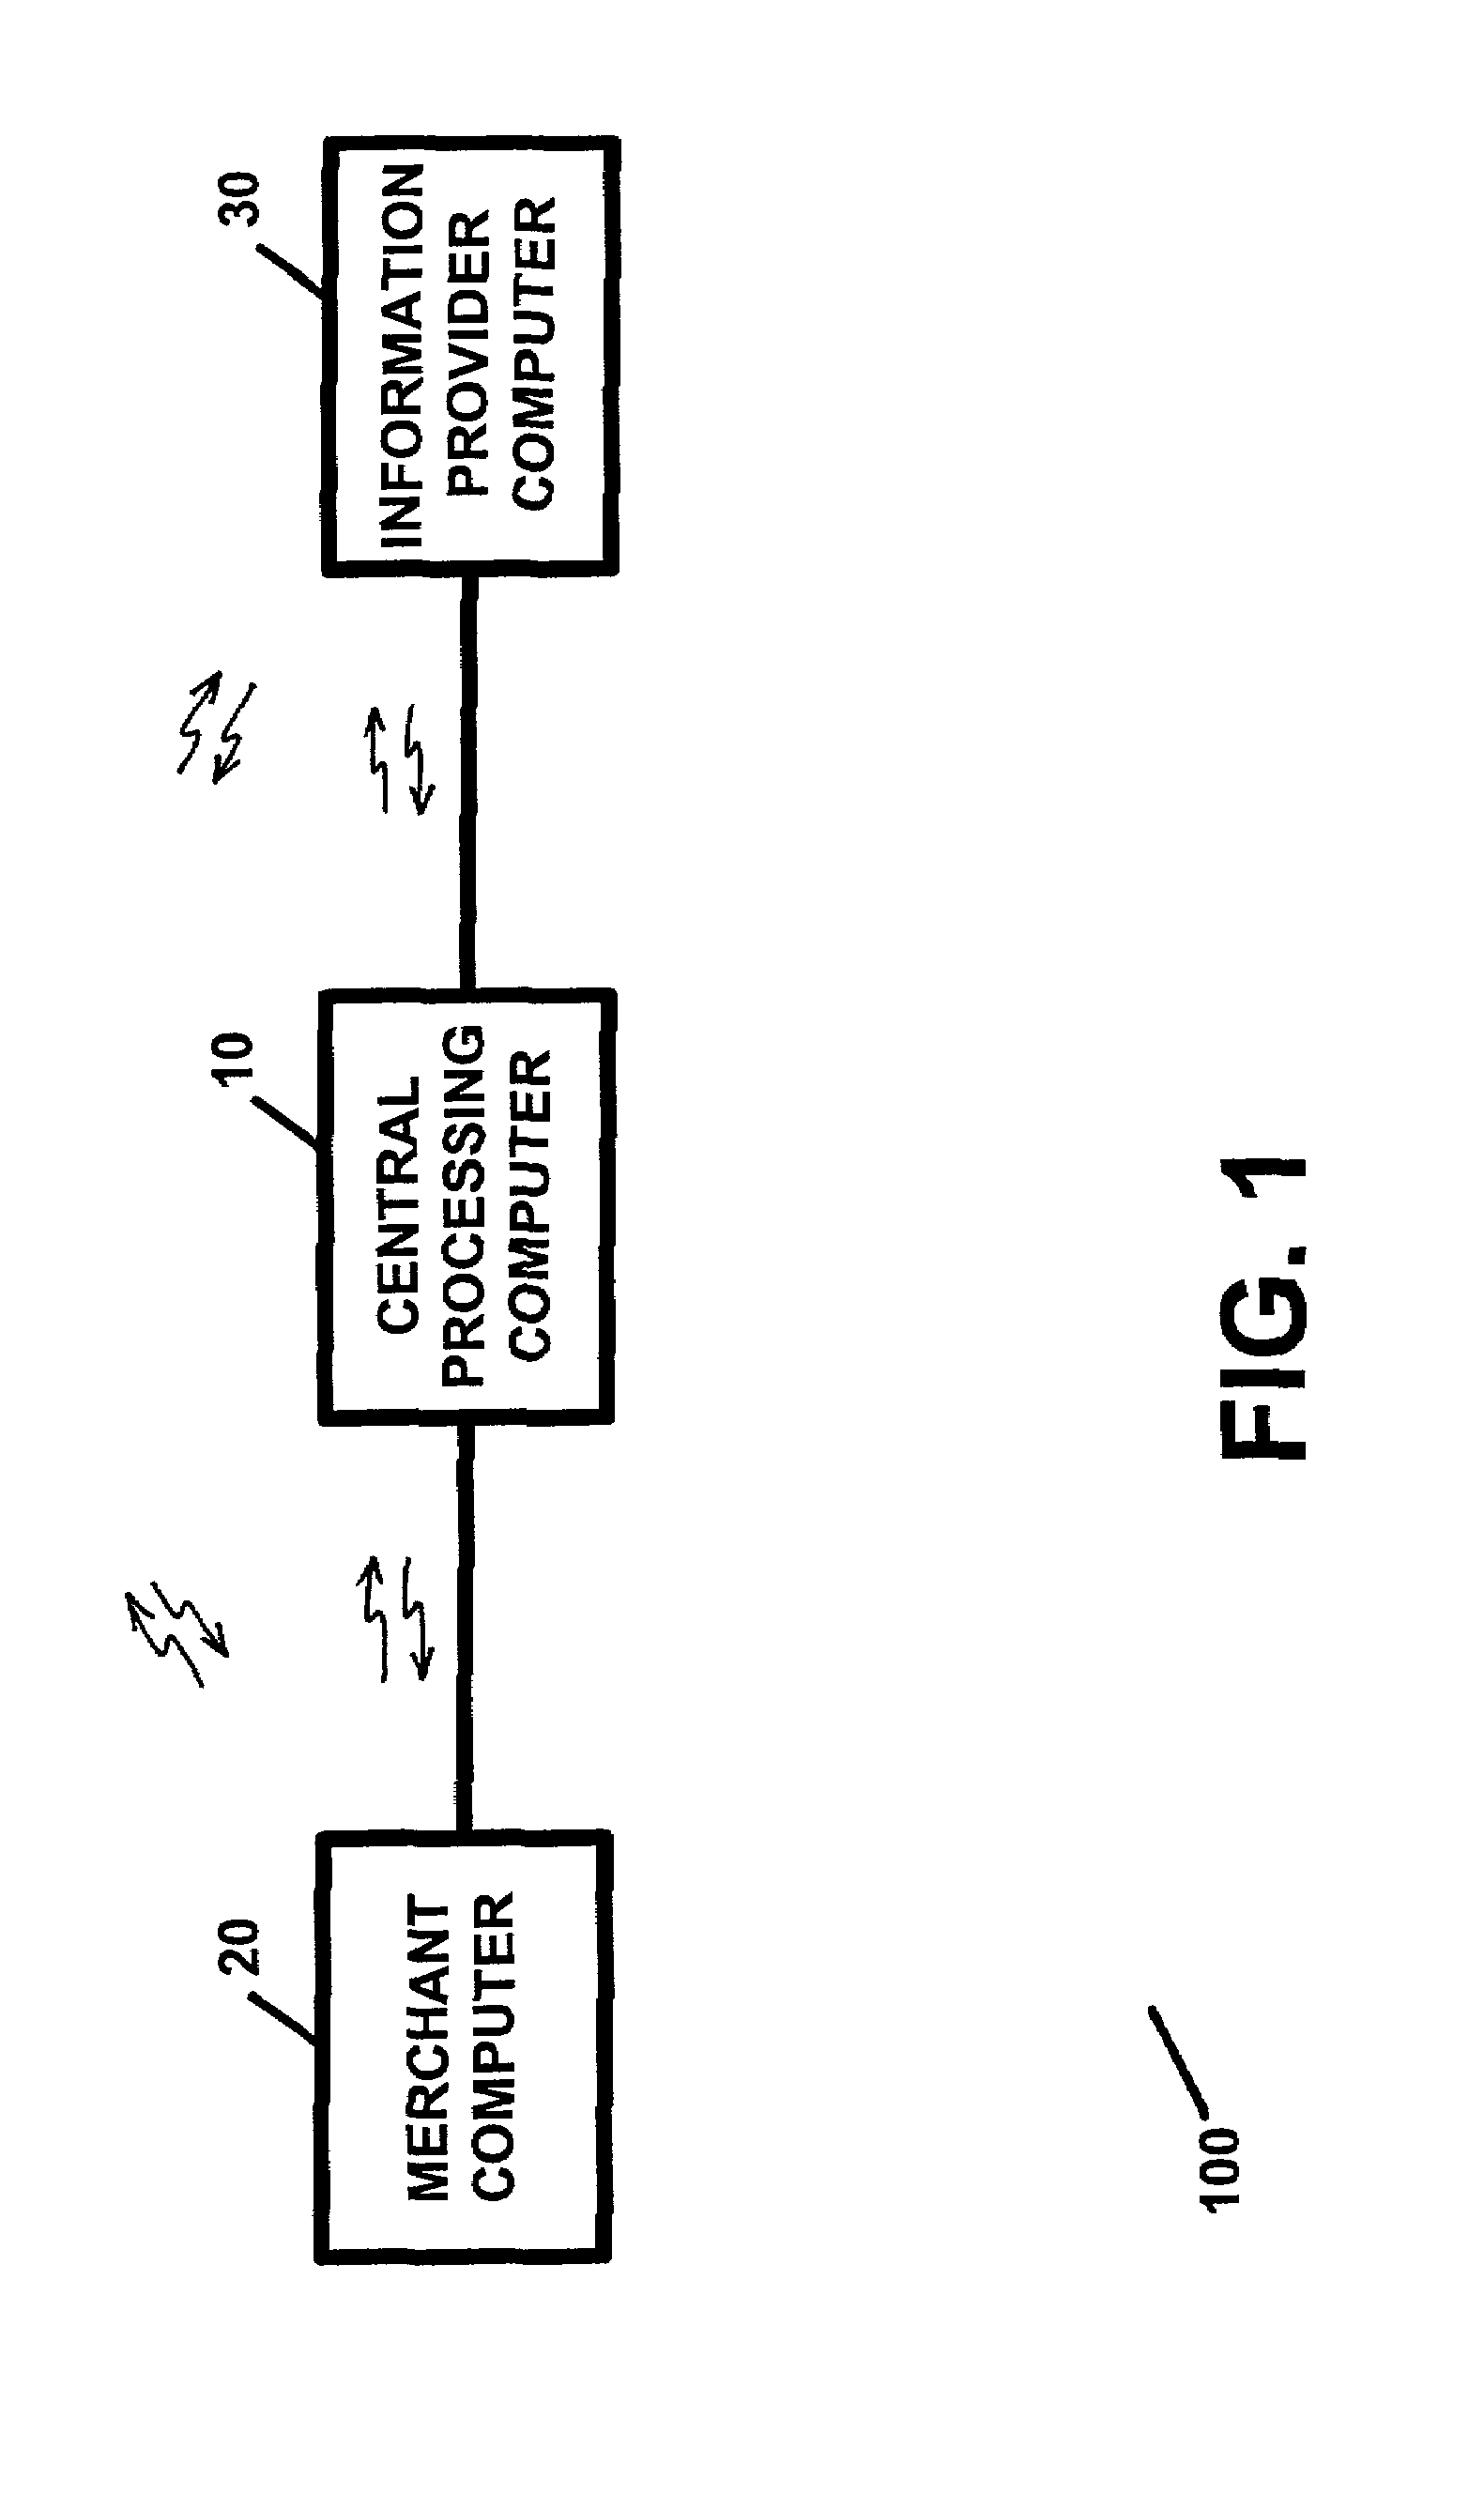 Apparatus and method for providing transaction history information, account history information, and/or charge-back information